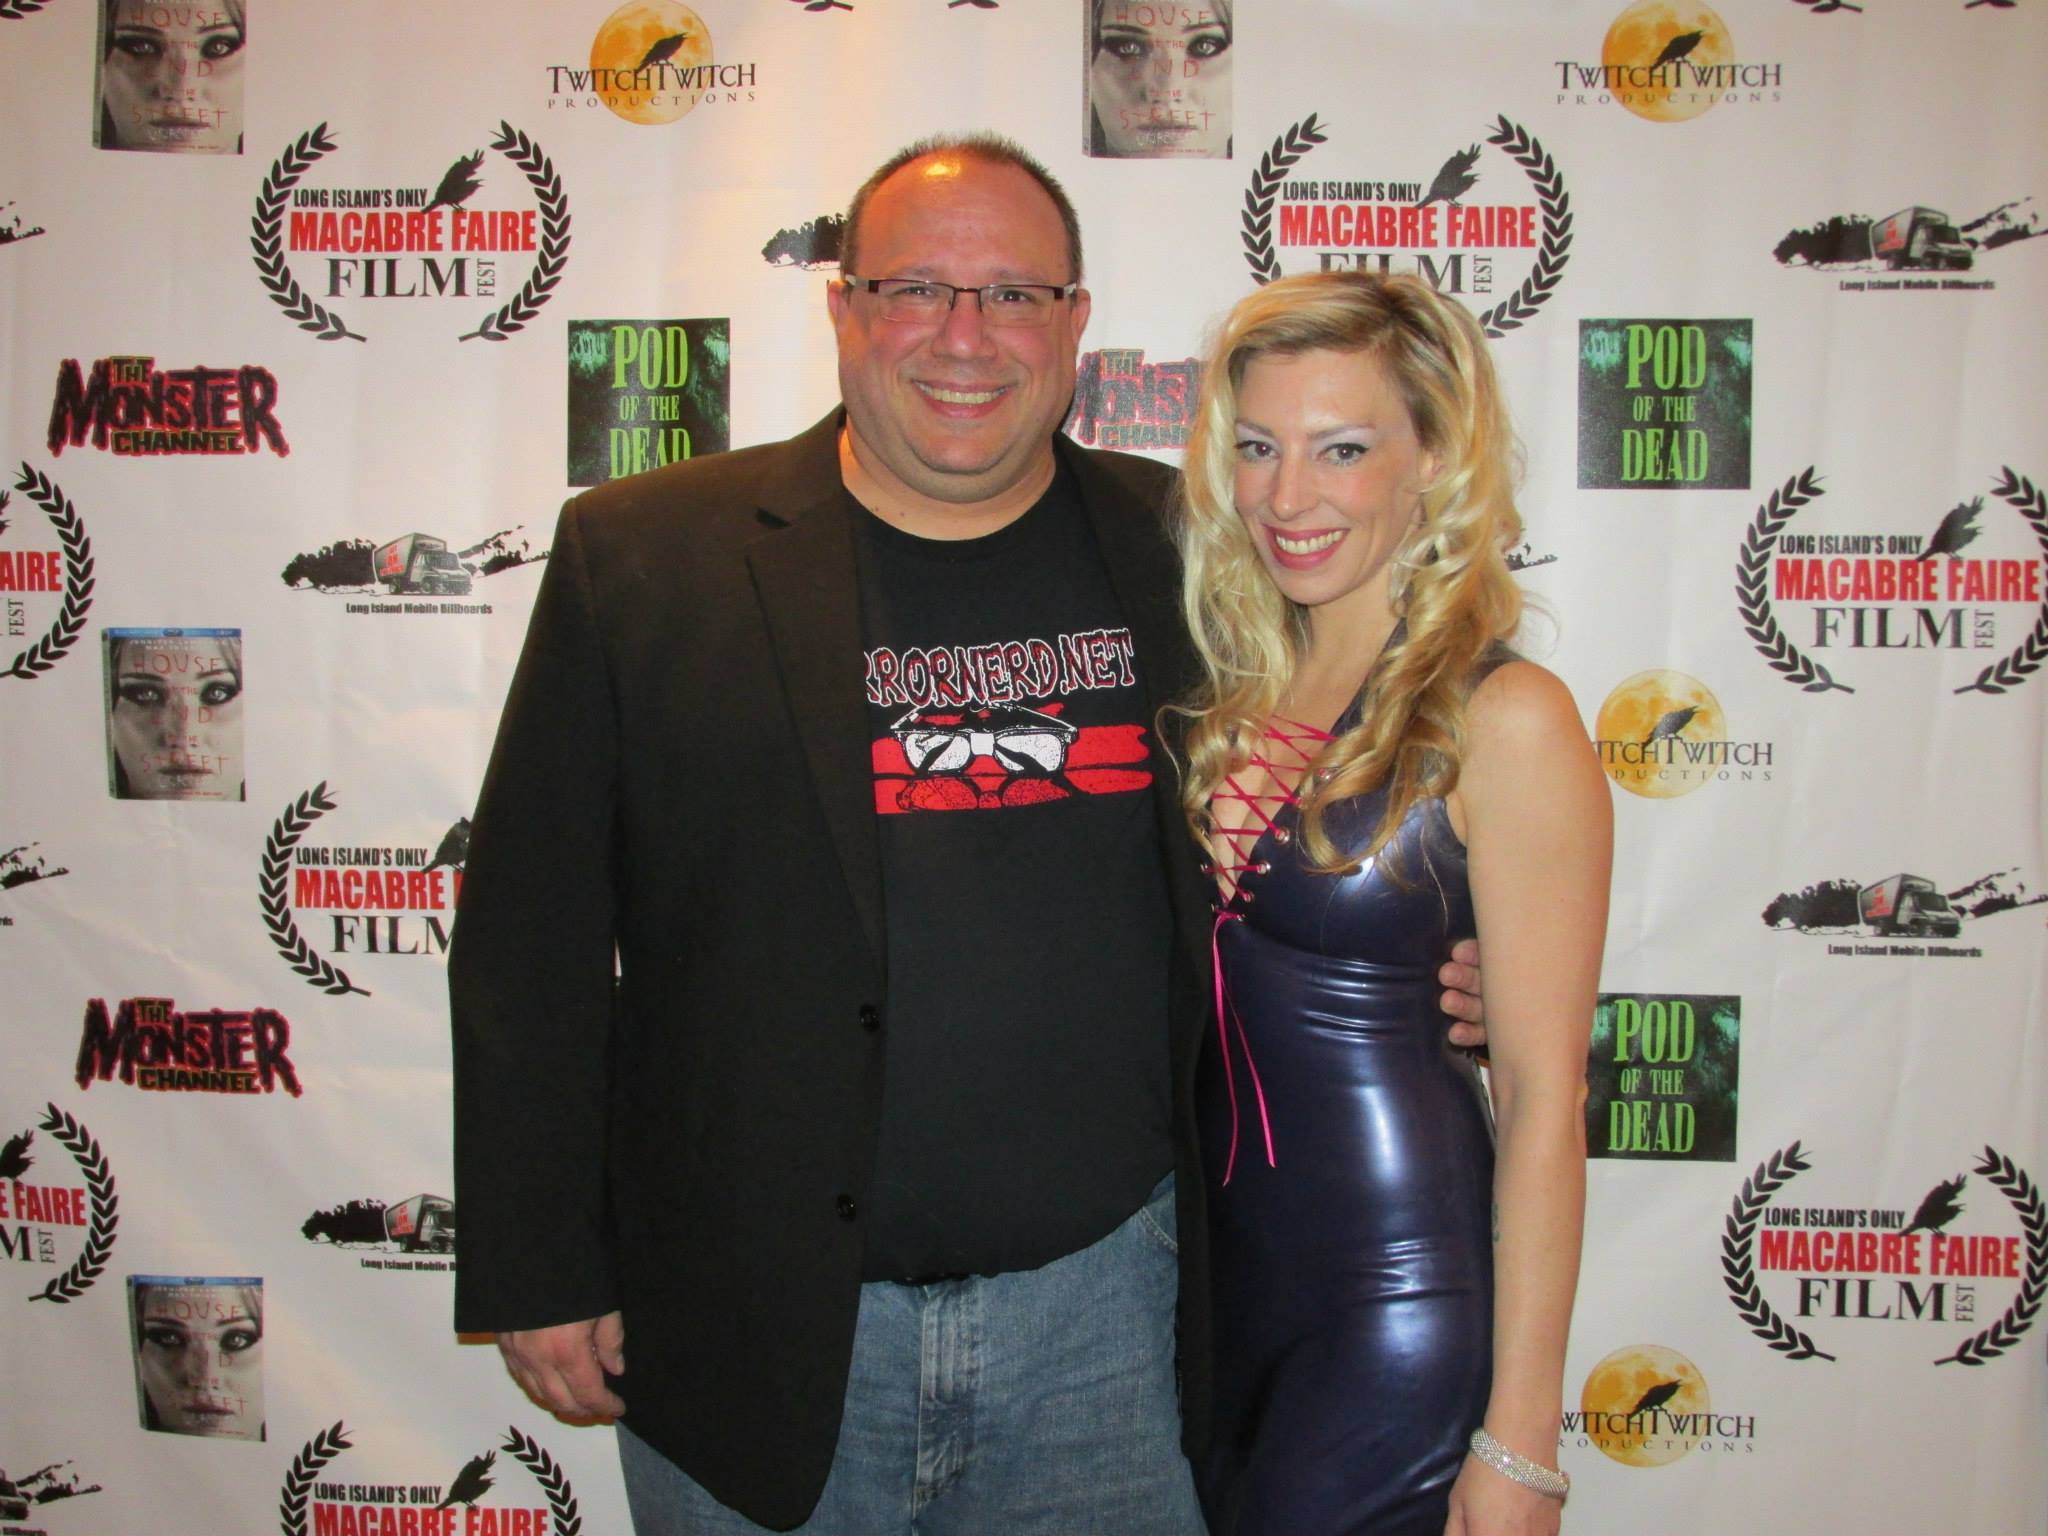 Todd Staruch and I at NYC Macabre Faire. Todd being a judge at the film festival